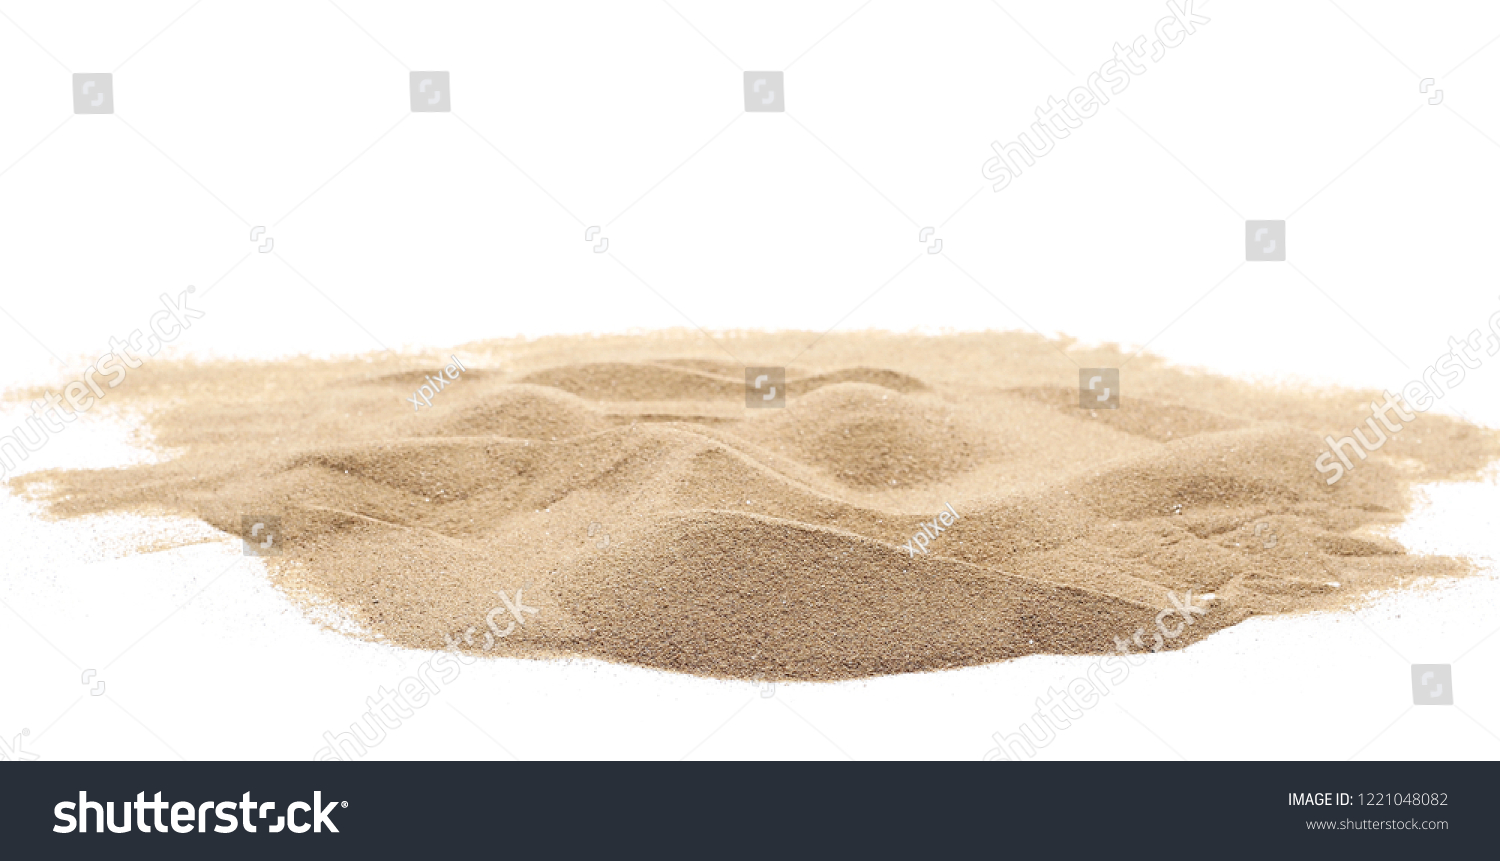 Desert sand pile, dune isolated on white background and texture, with clipping path #1221048082